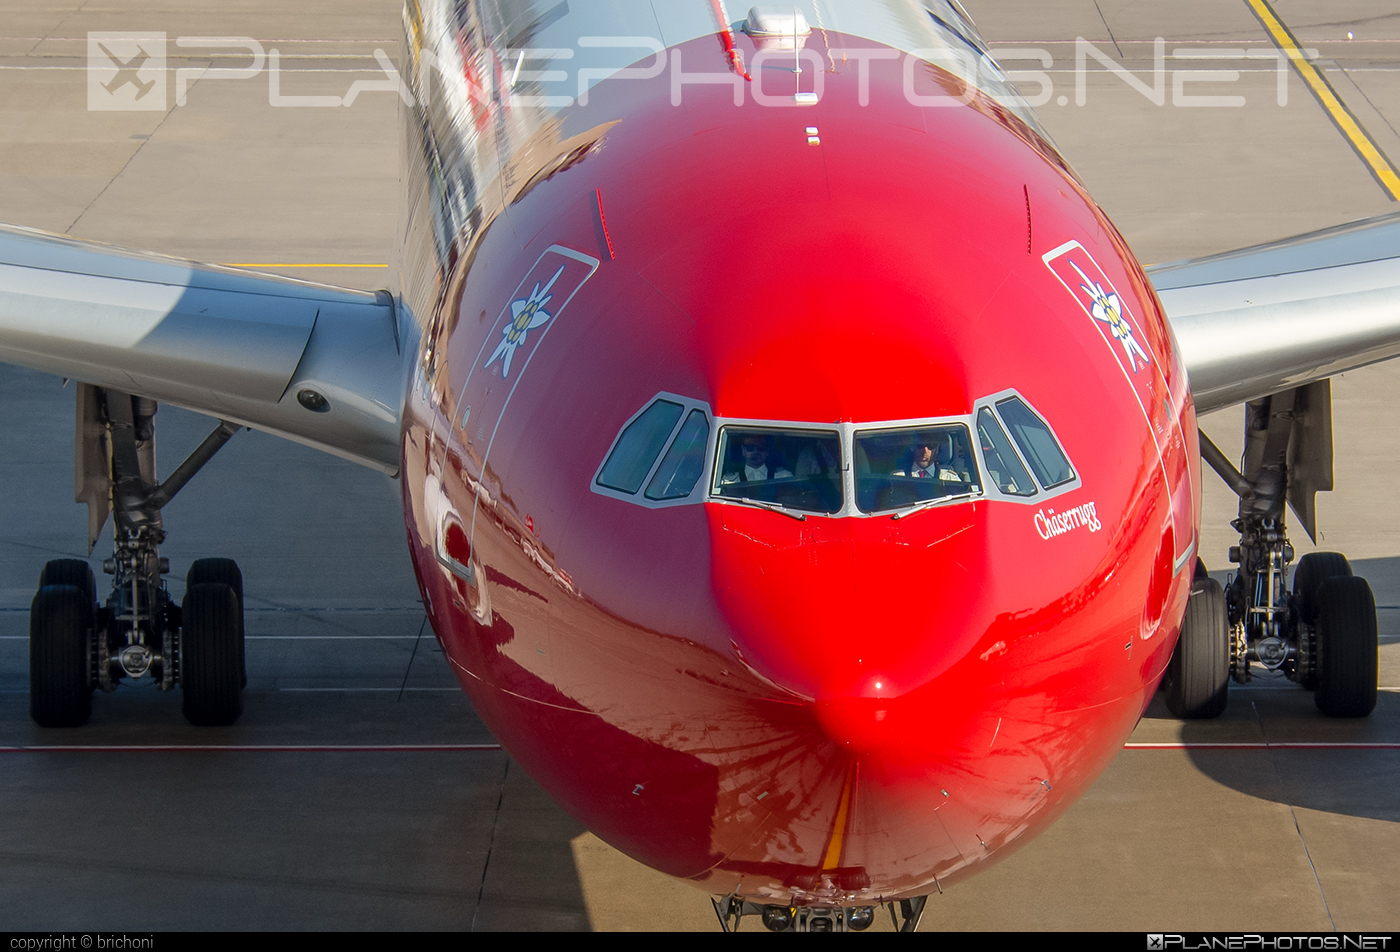 Airbus A330-343E - HB-JHR operated by Edelweiss Air #EdelweissAir #a330 #a330e #a330family #airbus #airbus330